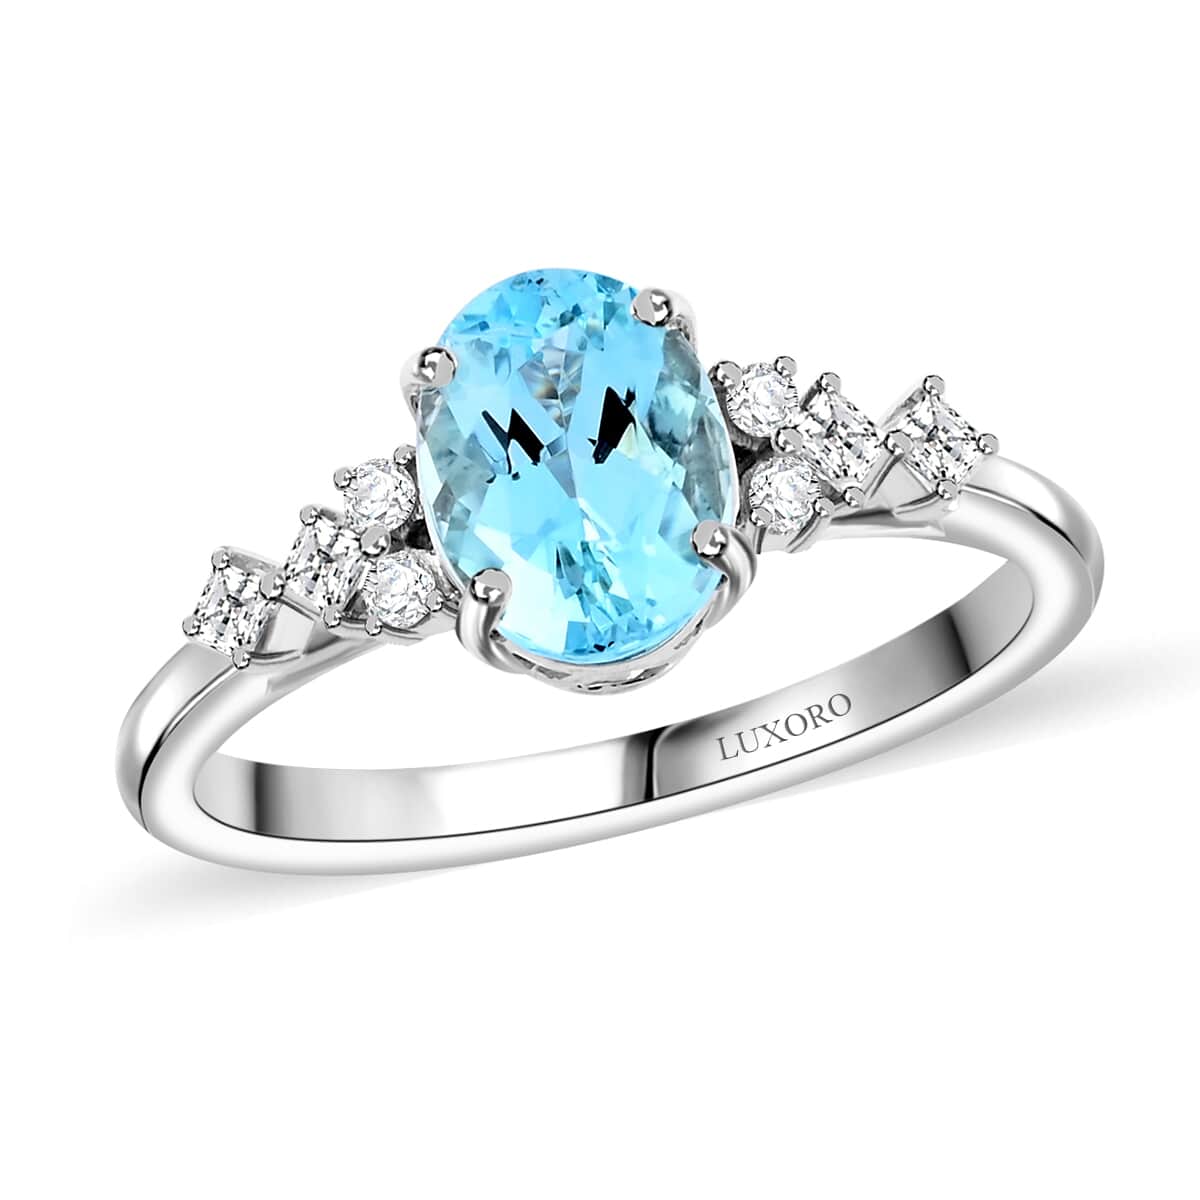 One Time Only Certified & Appraised Luxoro 14K White Gold AAA Santa Maria Aquamarine, Diamond (G-H, I2) (0.17 cts) Ring (Size 10.0) (Del. in 10-12 Days) 1.50 ctw image number 0